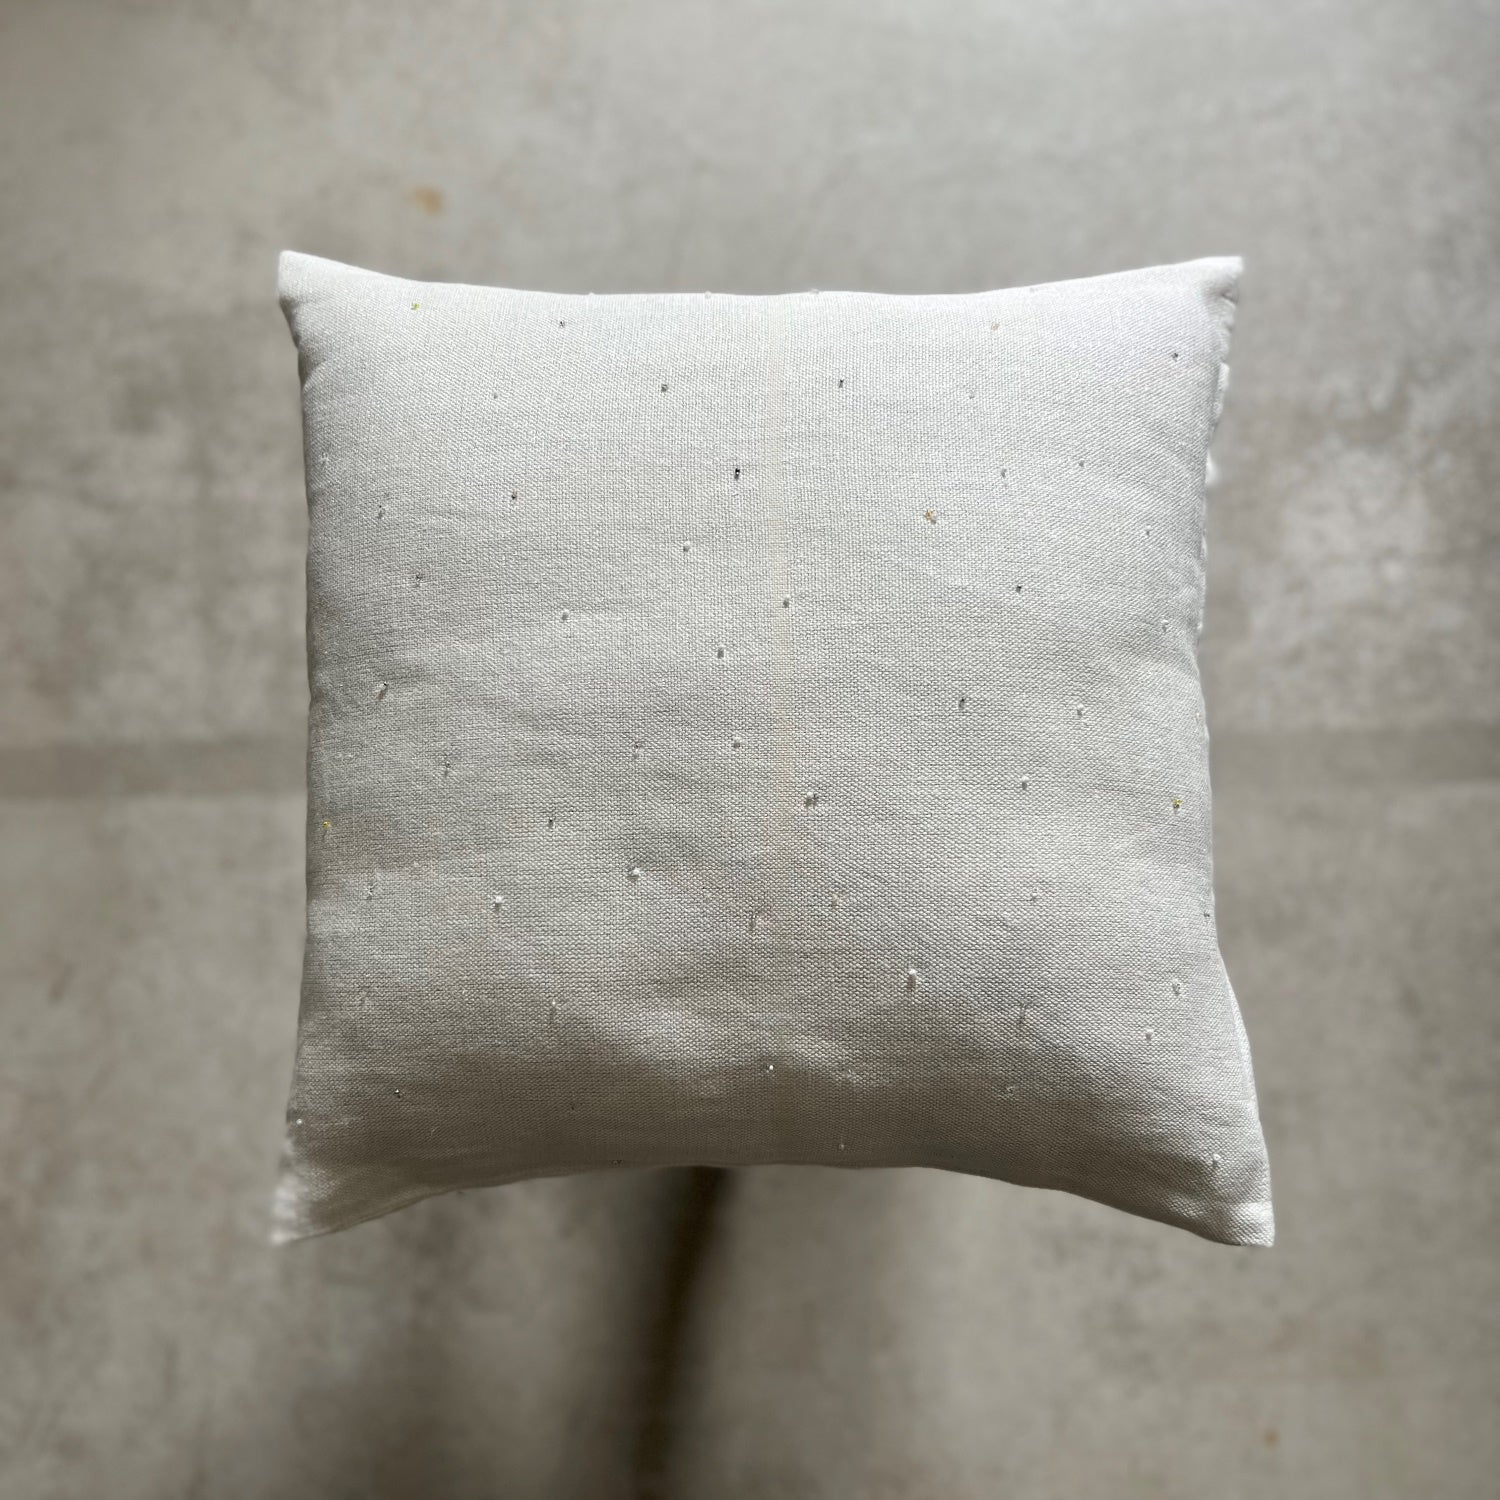 Handcrafted linen cushion with beads in white and silver 45x45 cm